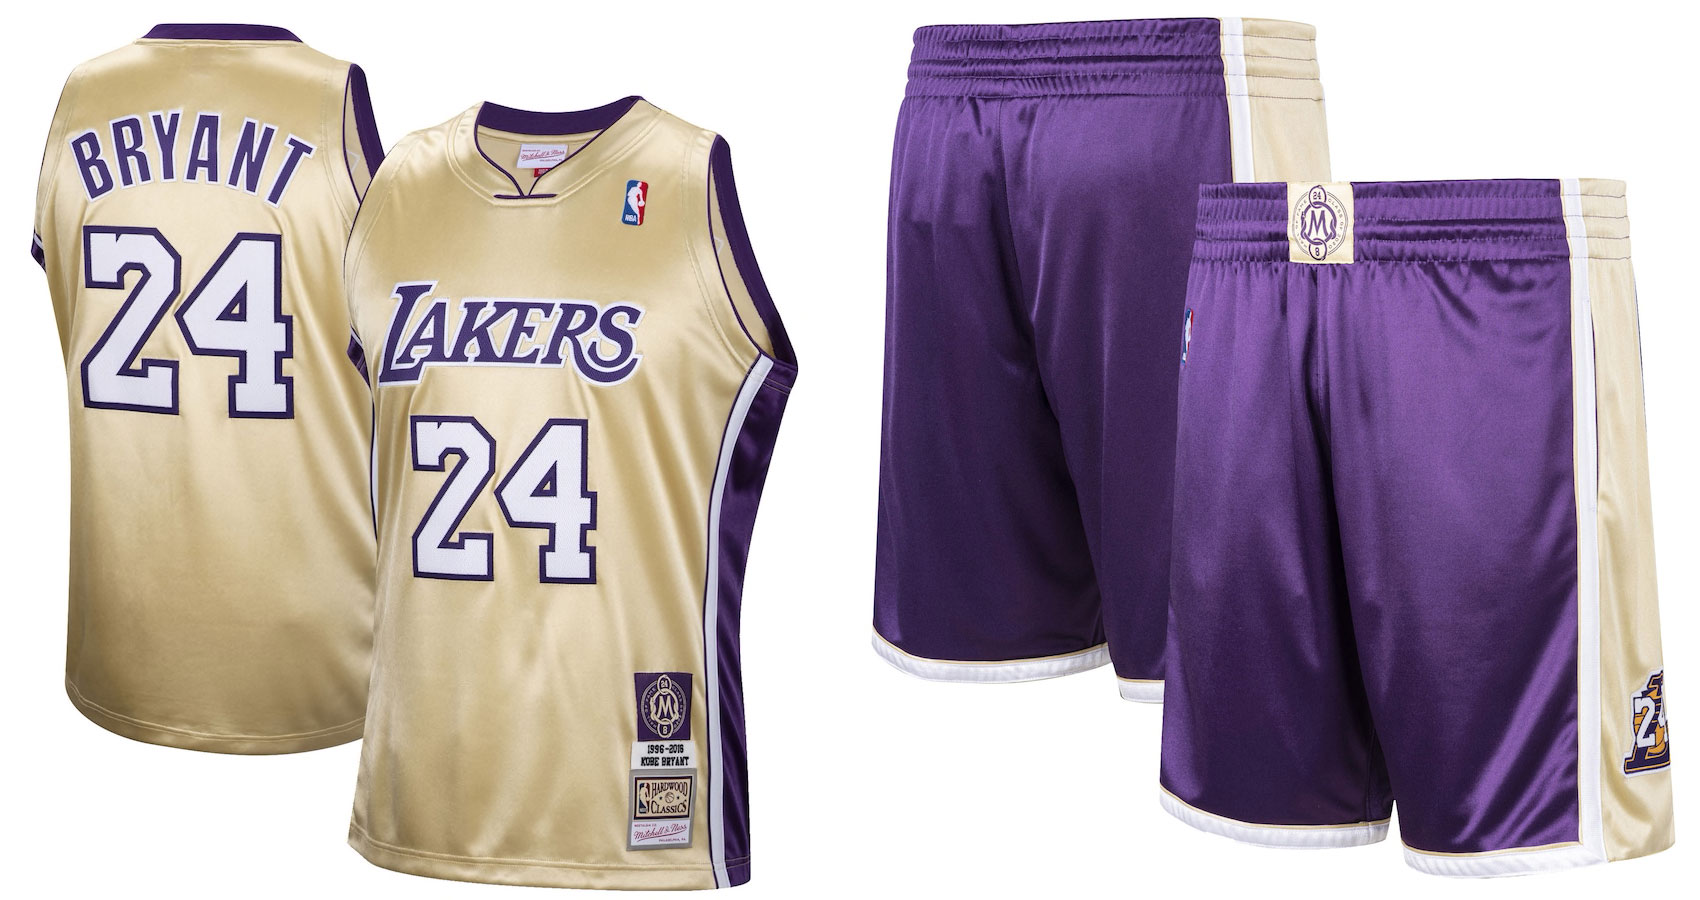 Kobe Bryant Lakers Hall of Fame Jerseys and Shorts | Gov